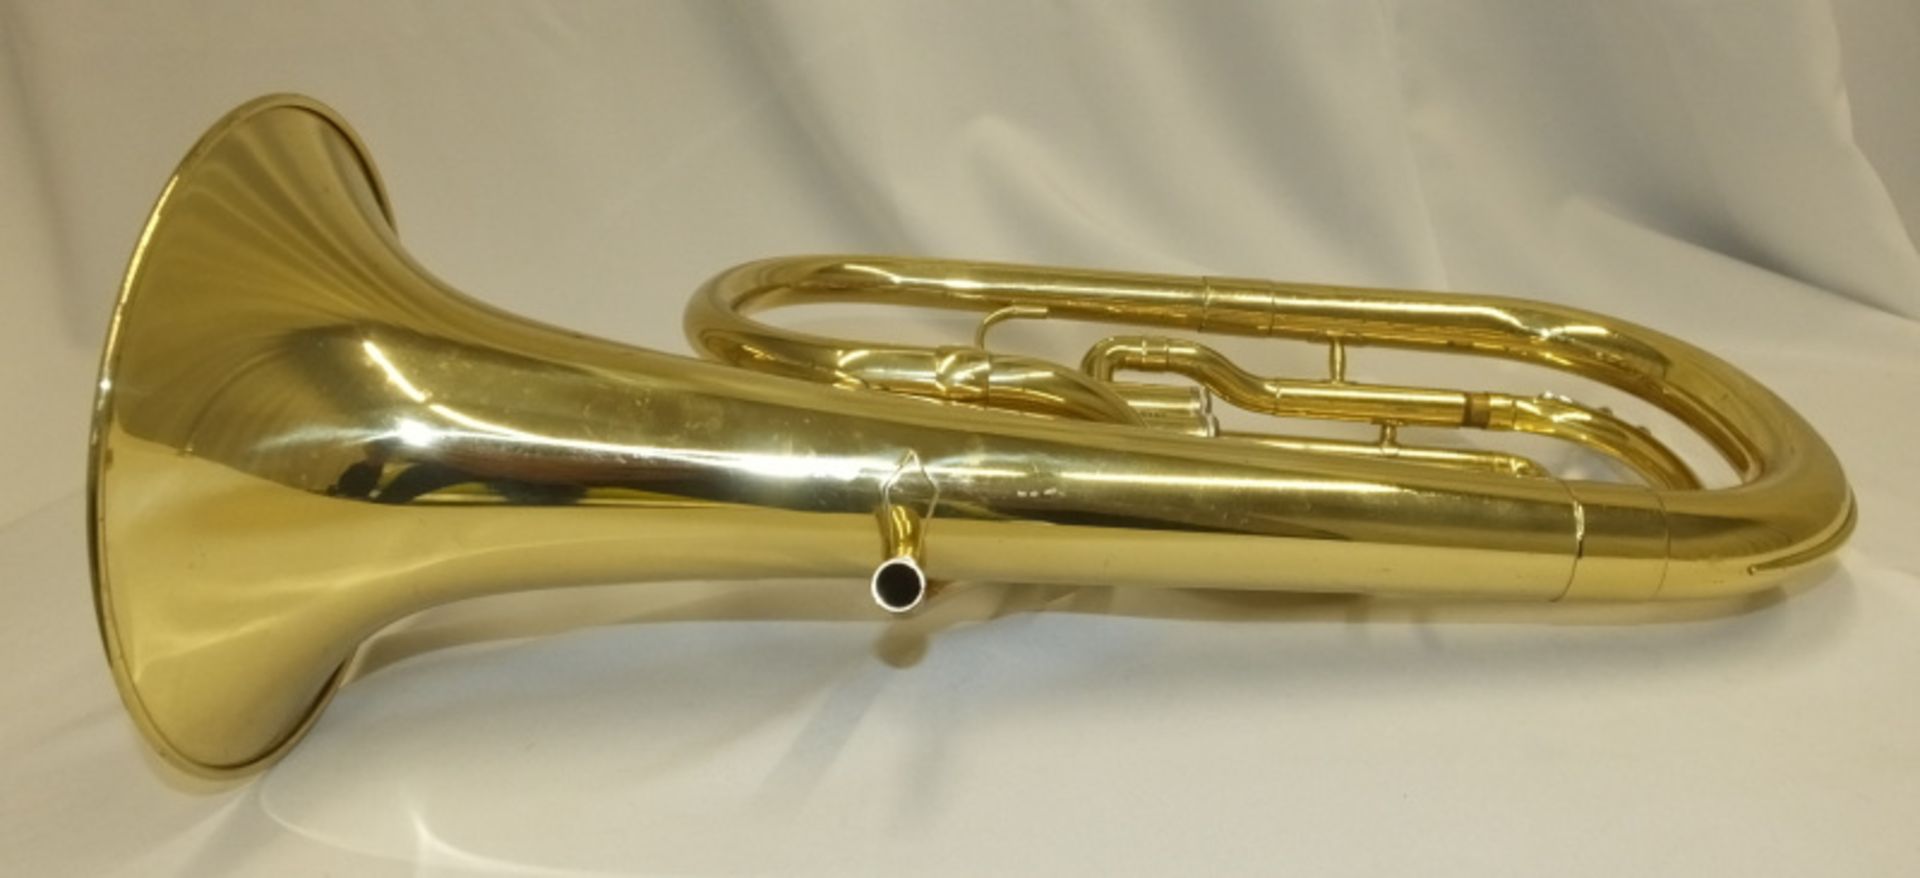 Yamaha YAH202 Alto Horn in case - serial number 020192 - Please check photos carefully - Image 10 of 13